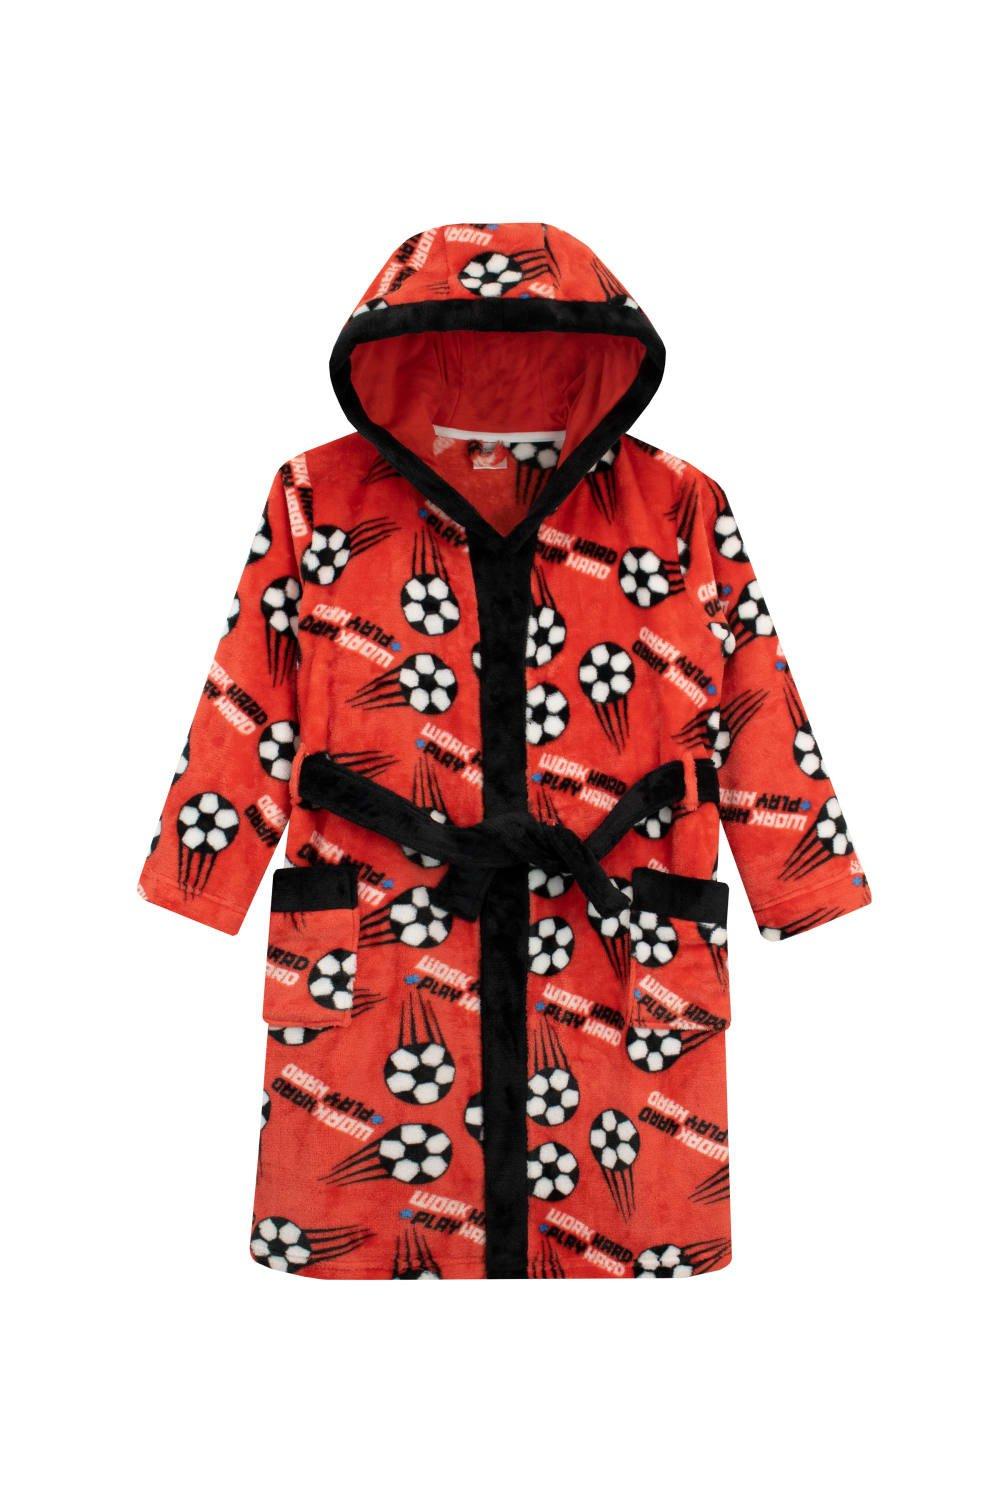 Long Sleeve Football Dressing Gown